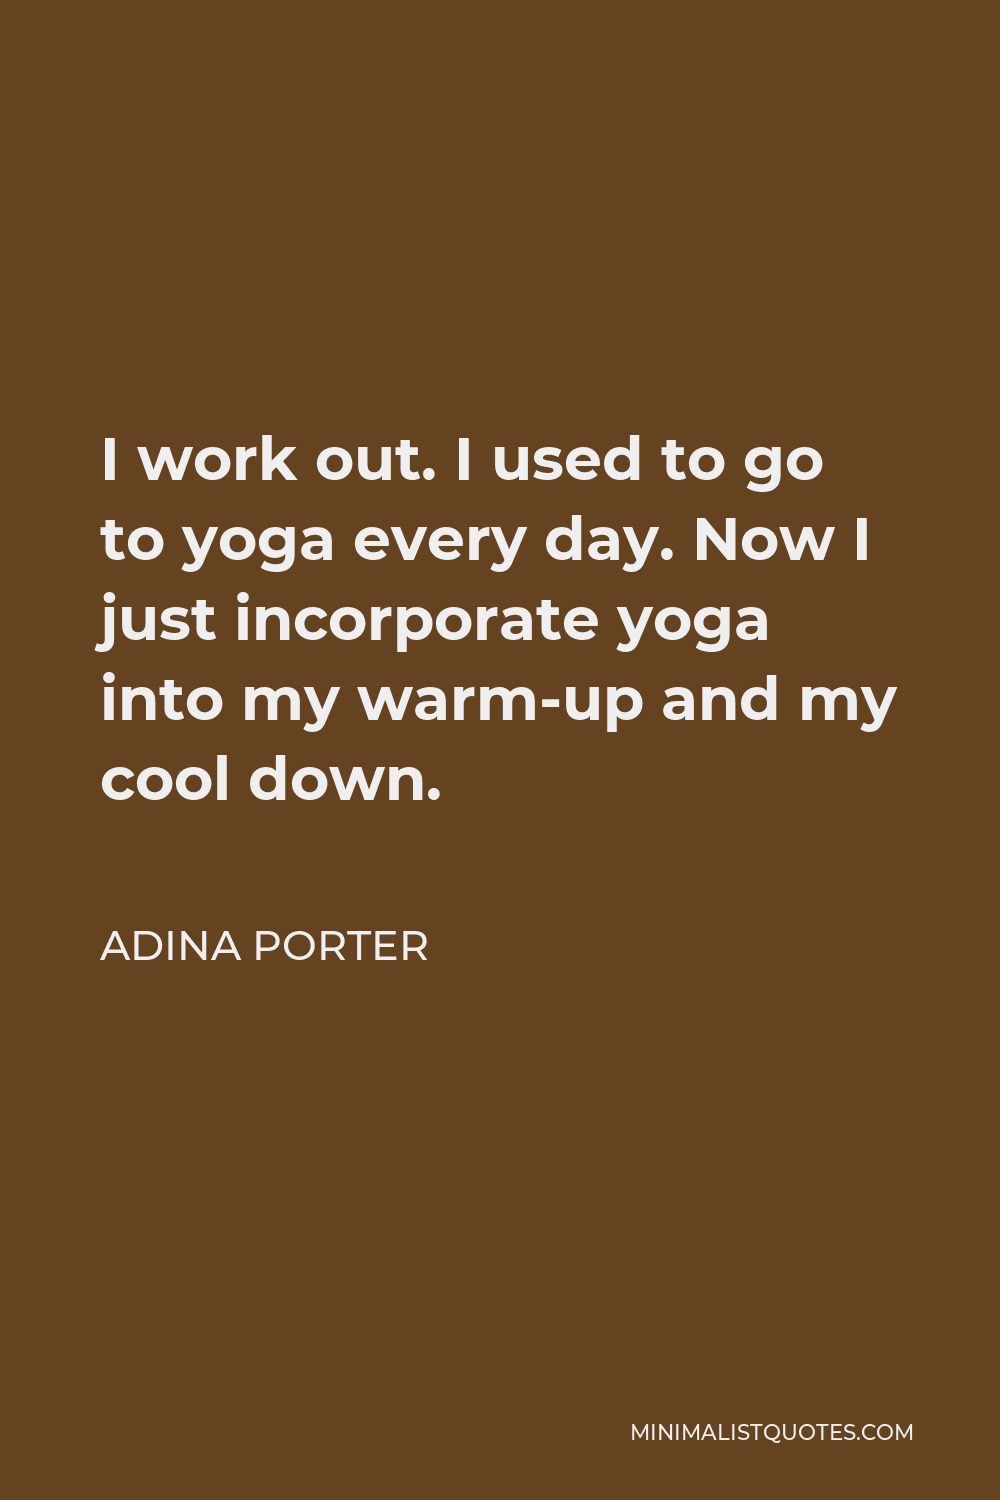 Adina Porter Quote - I work out. I used to go to yoga every day. Now I just incorporate yoga into my warm-up and my cool down.